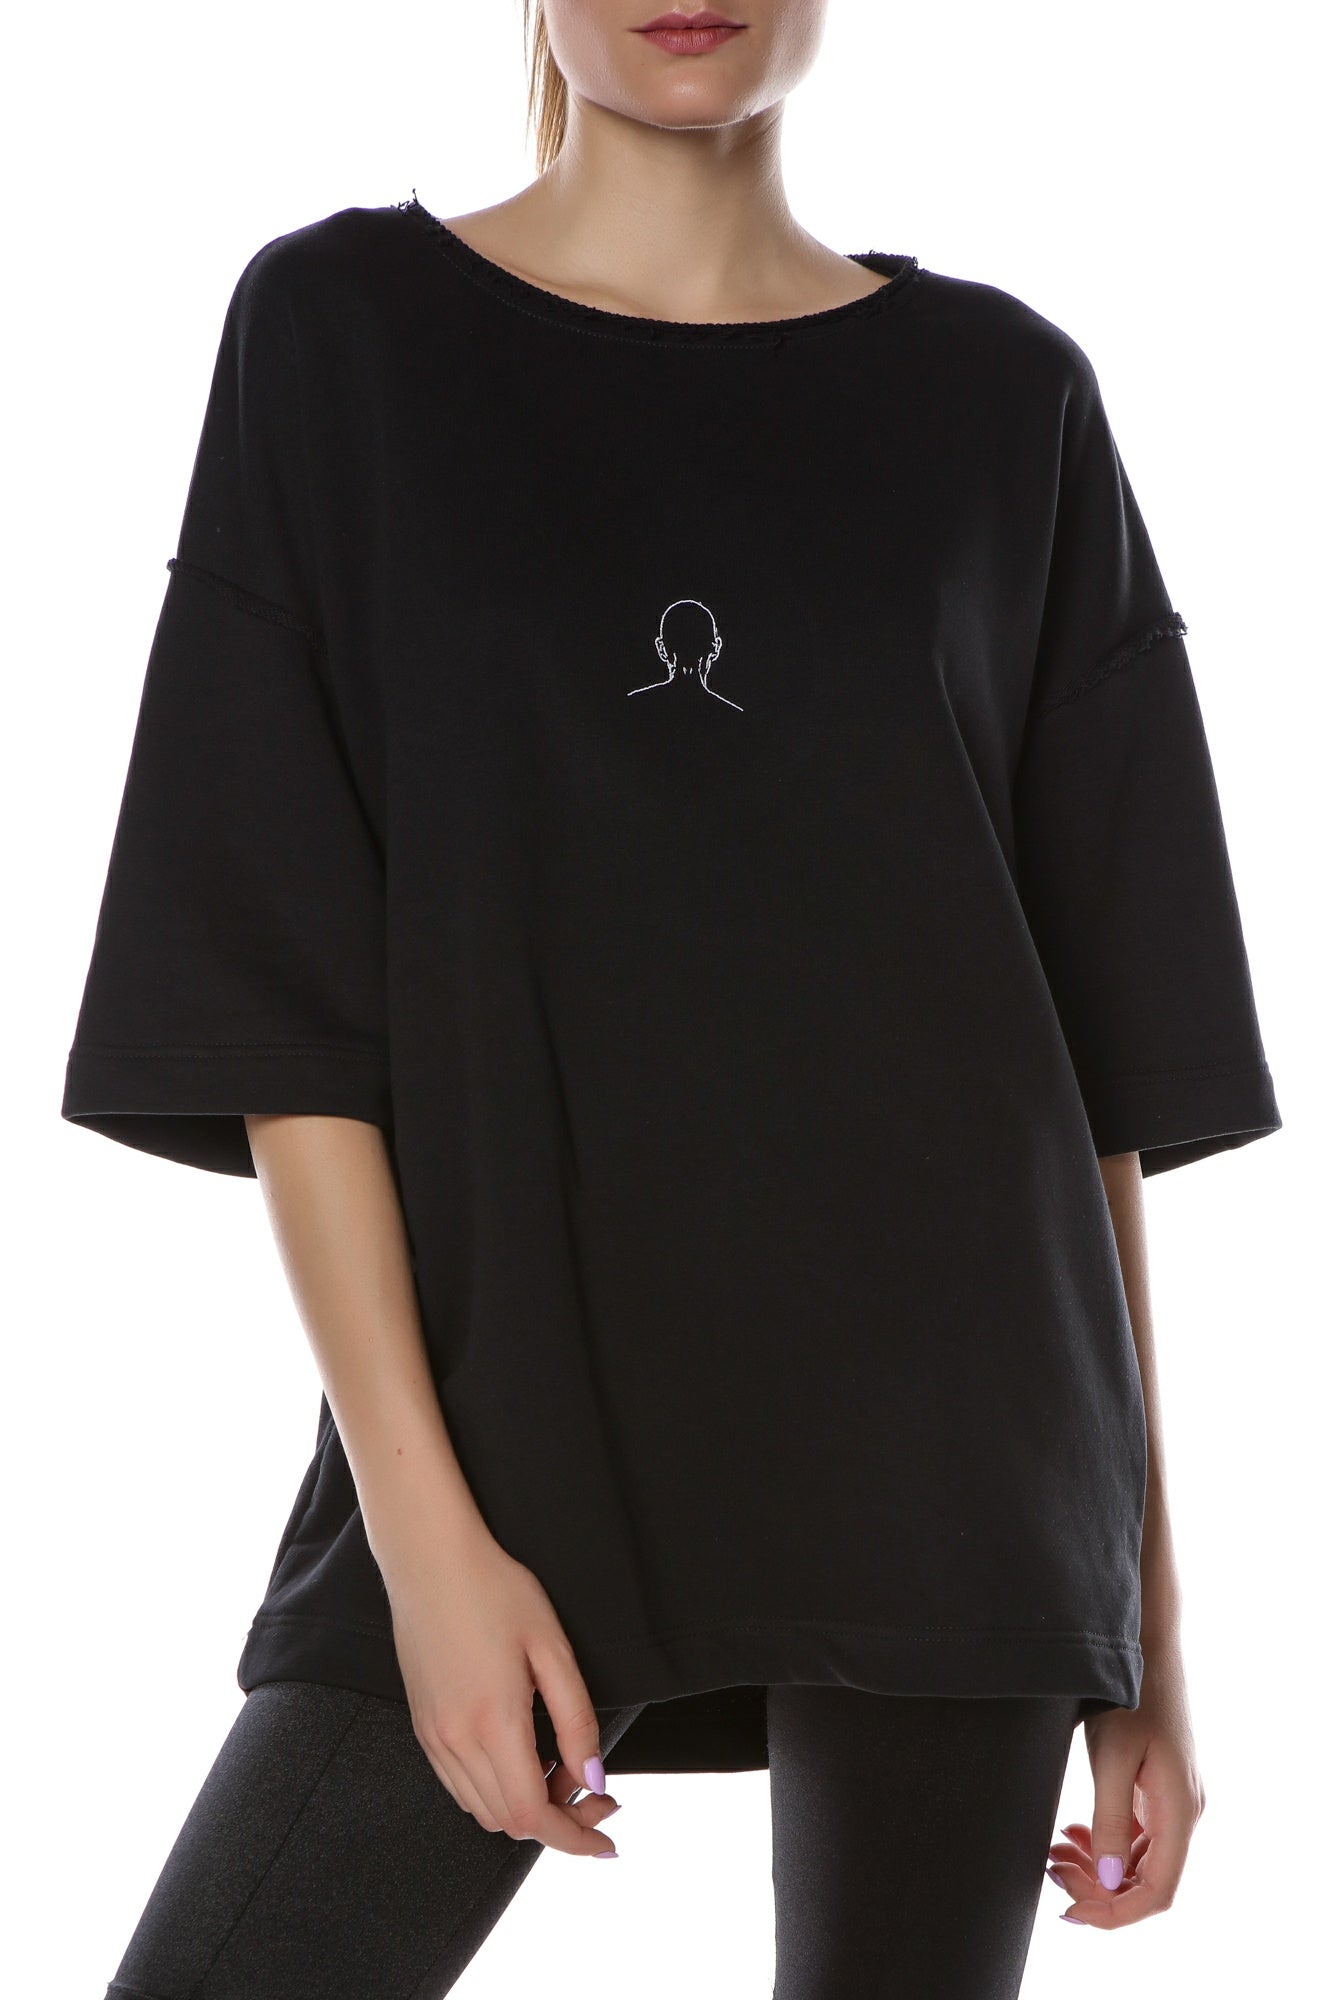 CHAOS embroidered W BLACK T-shirt